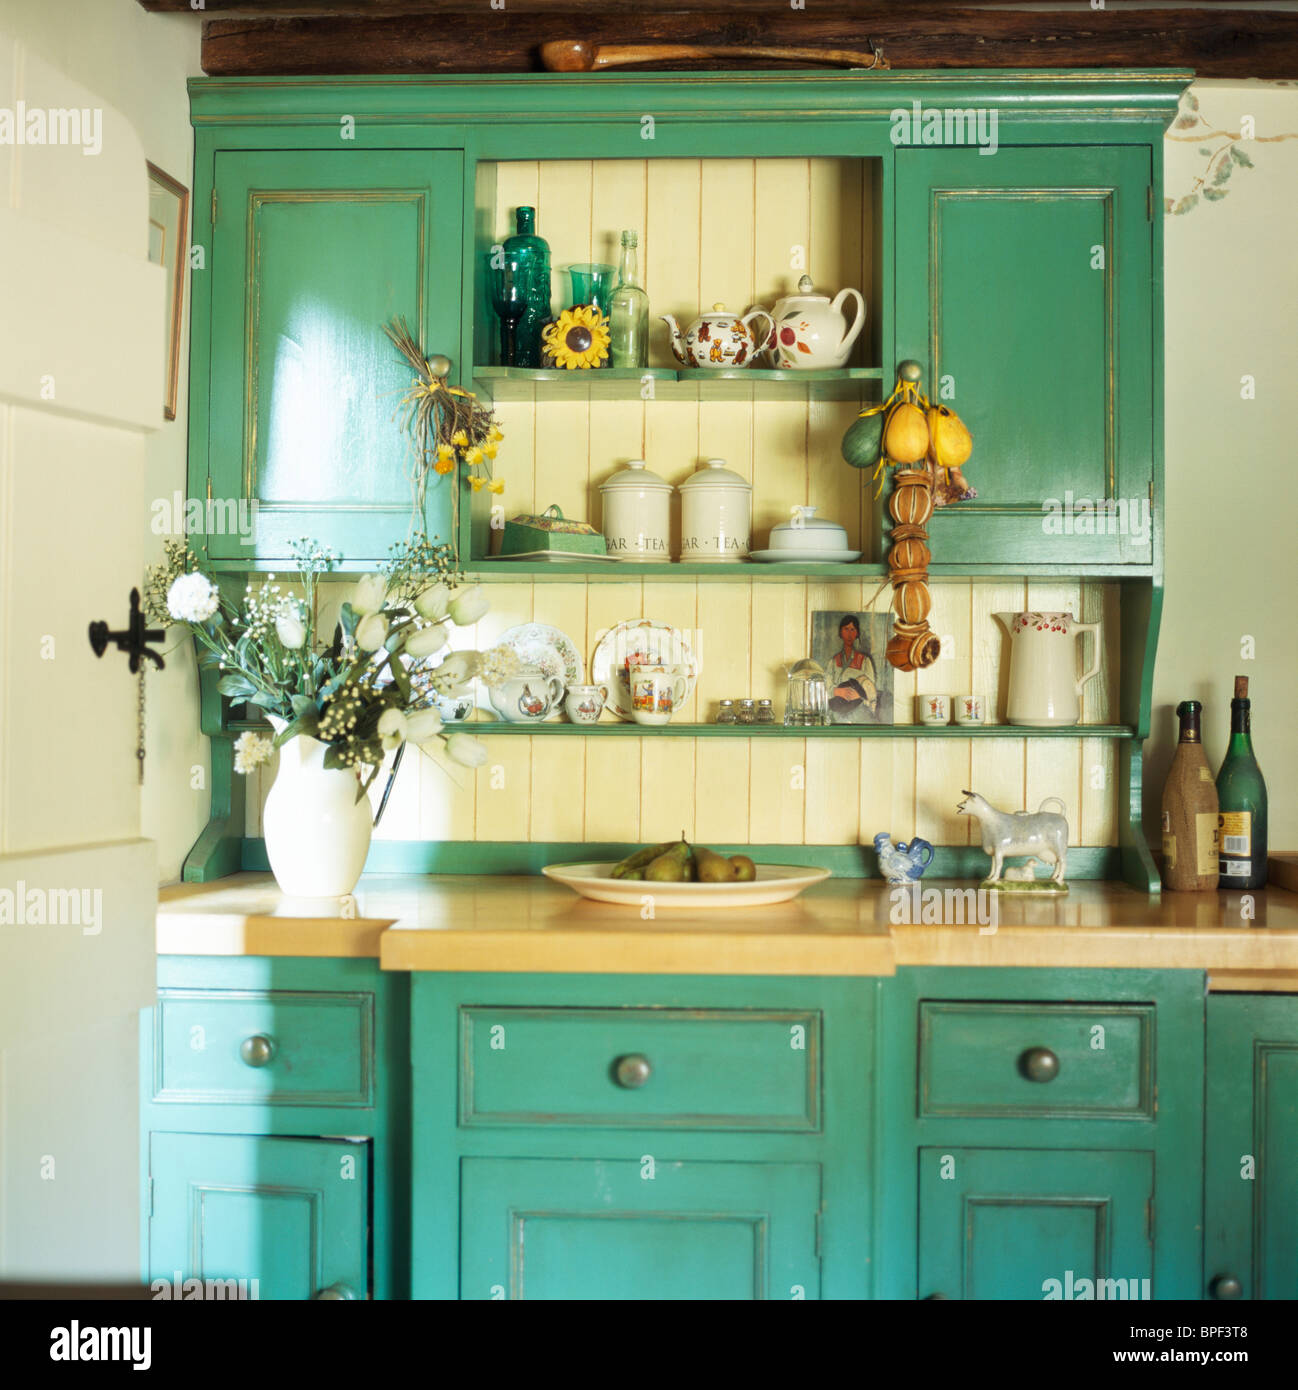 Fitted Turquoise Green Dresser In Cream Kitchen Stock Photo